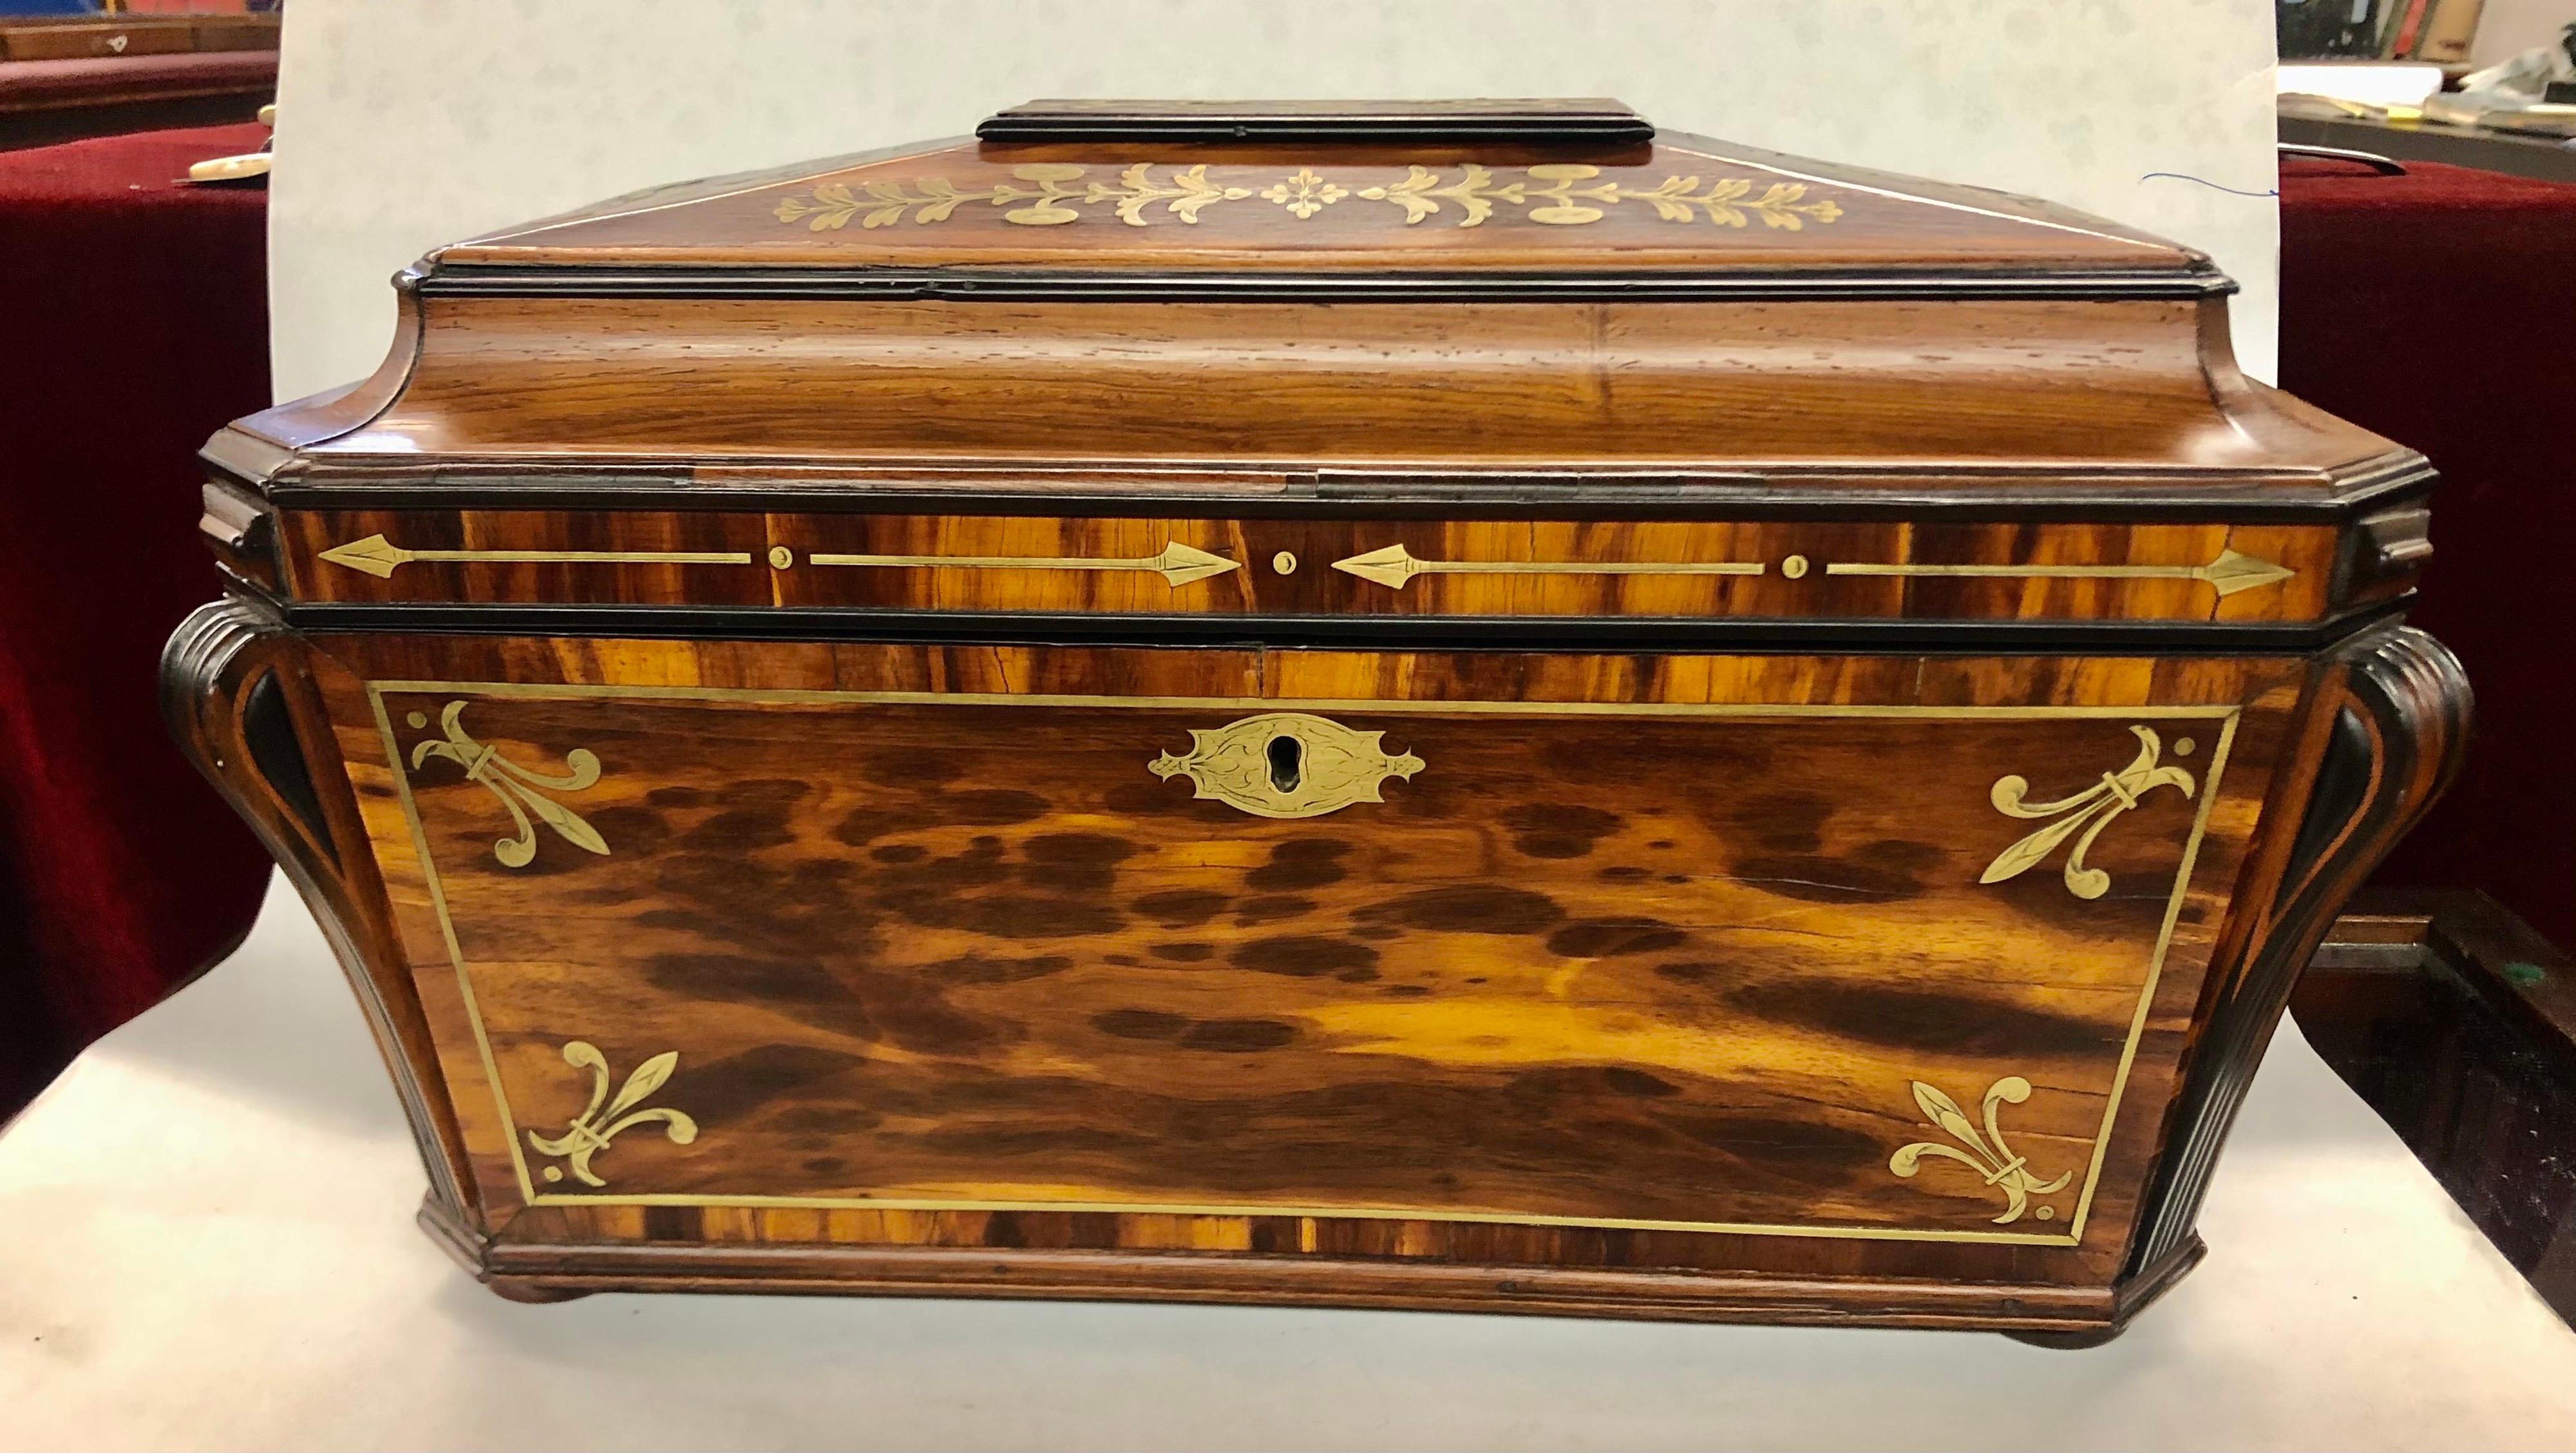 PLEASE NOTE EXTRAORDINARILY LARGE DIMENSIONS!!!
Quite possibly the largest and finest antique English inlaid rosewood monumental size Sarcophagus shape tea caddy we have ever procured. In mint condition, this caddy retains its exceptionally hand